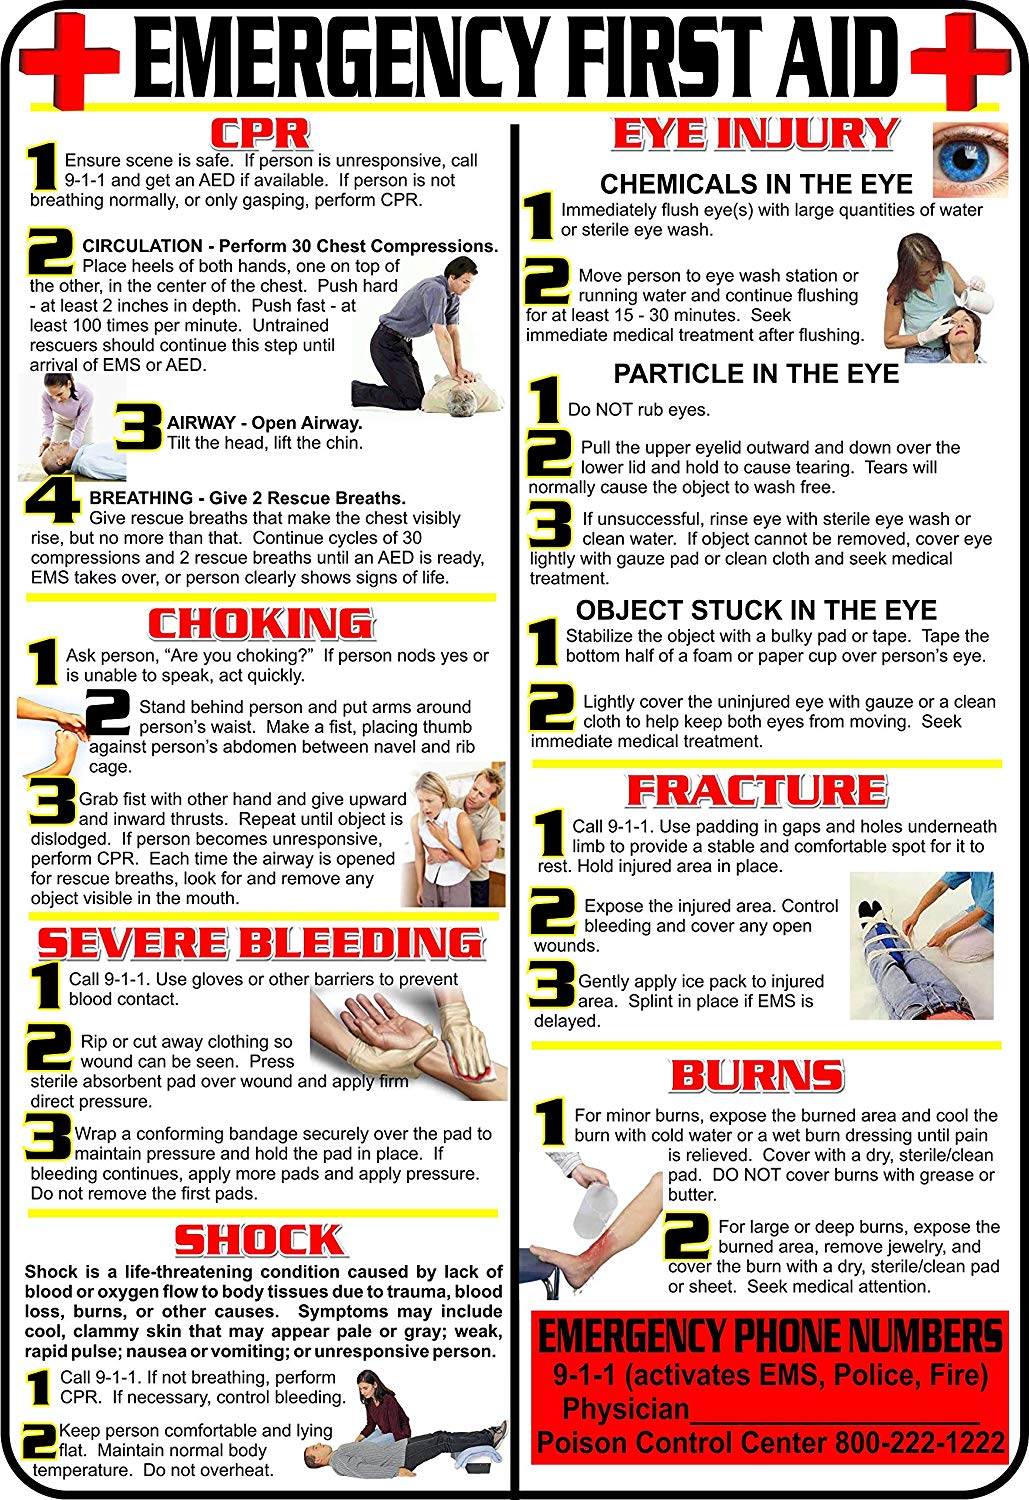 Emergency First Aid Poster